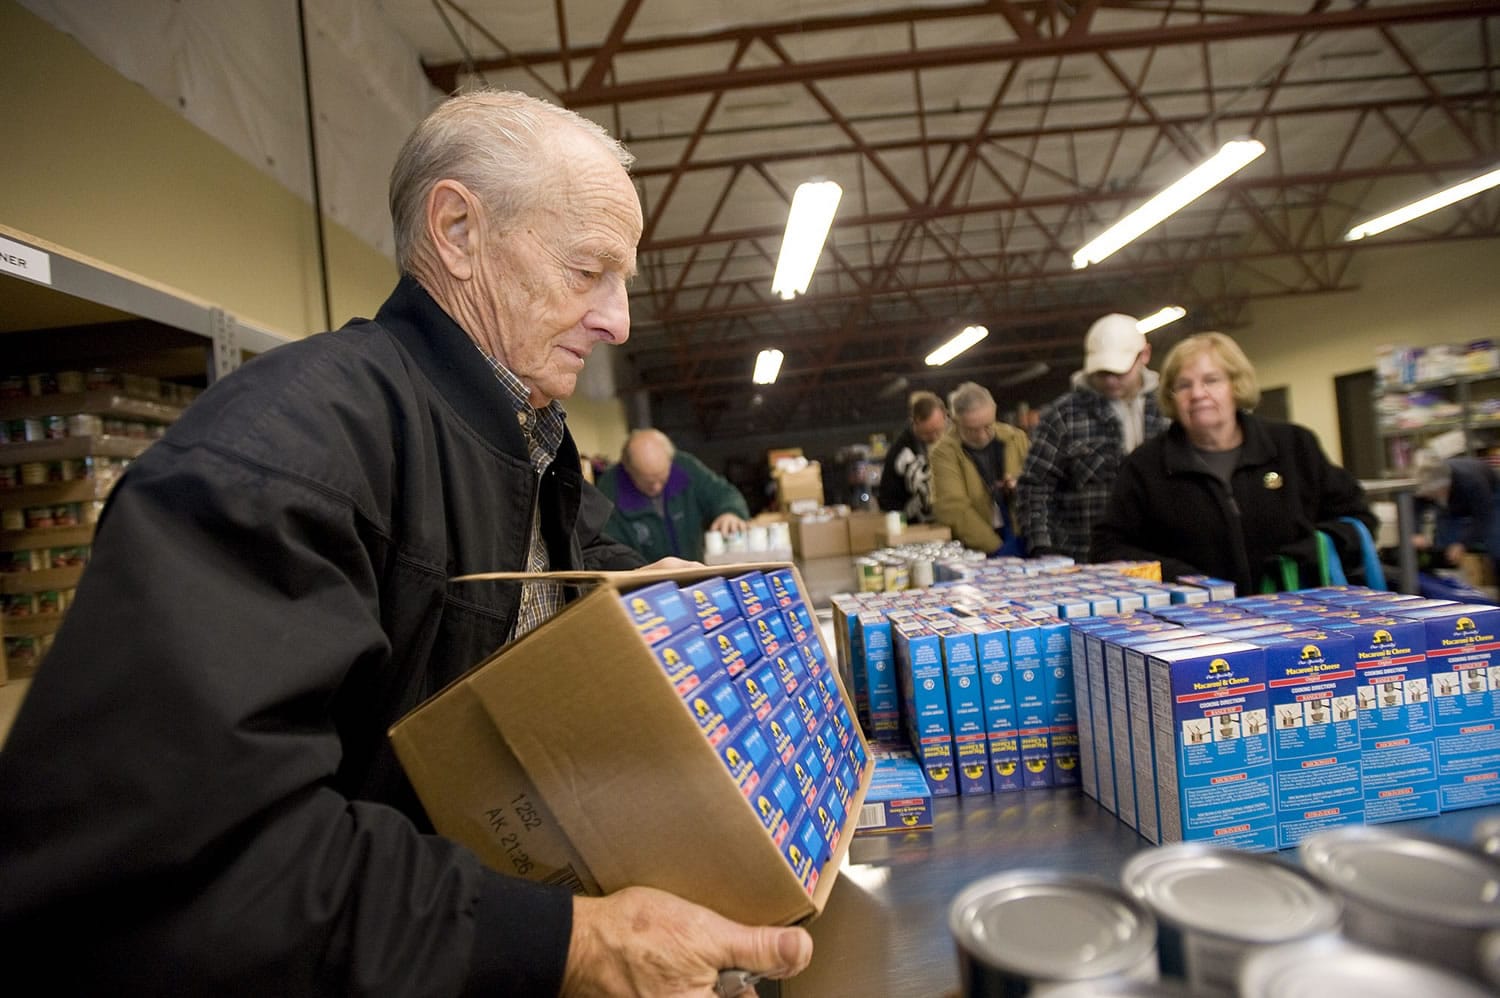 Volunteer Joe Smith, 76, stacks the mac-n-cheese that will help feed hungry kids through the Share Backpack Program.